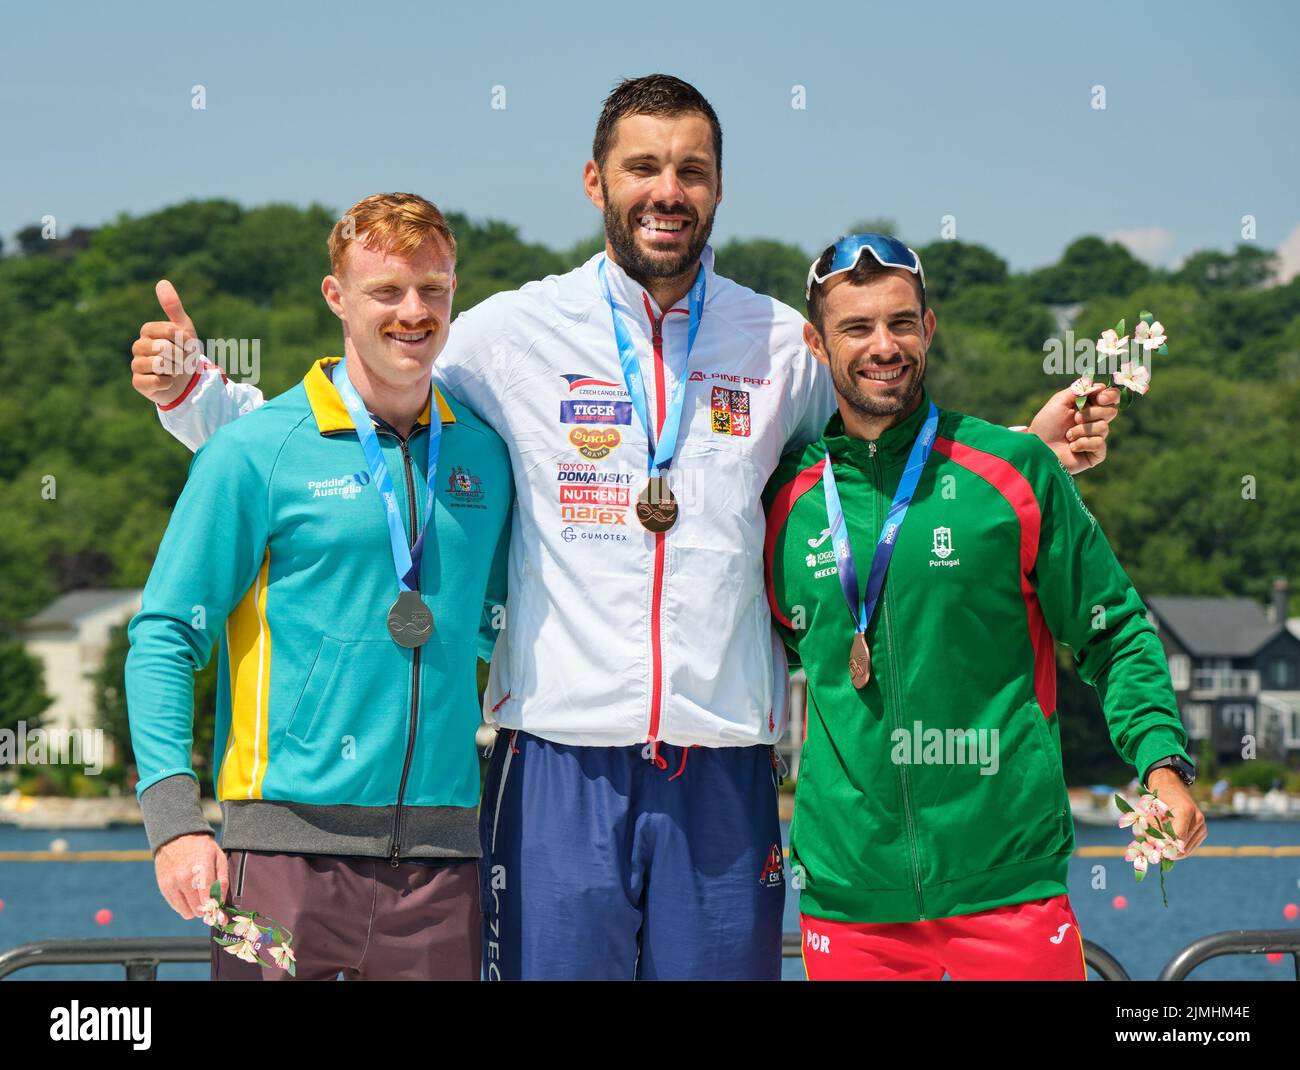 Dartmouth, Canada. August 6th, 2022. Men K1 500m World Championship Podium, Josef Dostal from the Czech Republic Gold, Jean Westhuyzen from Australia Silver and Fernando Pimenta from Portugal takes Bronze . The 2022 ICF Canoe Sprint and Paracanoe World Championships takes place on Lake Banook in Dartmouth (Halifax). Credit: meanderingemu /Alamy Live News Stock Photo